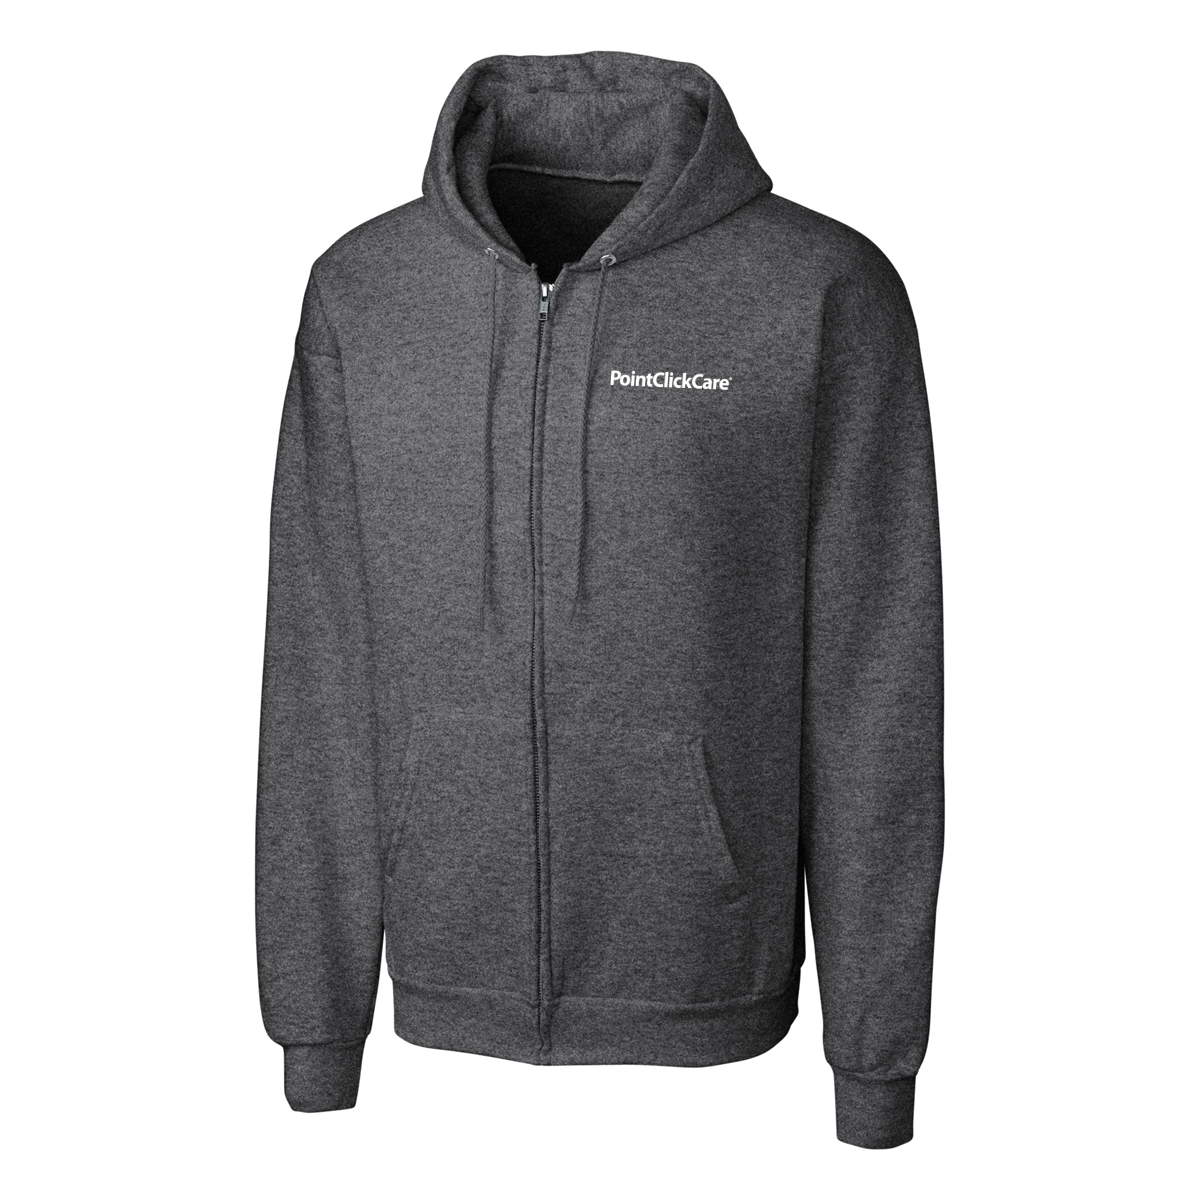 PointClickCare Full-Zip Hoodies - PointClickCare Online Store